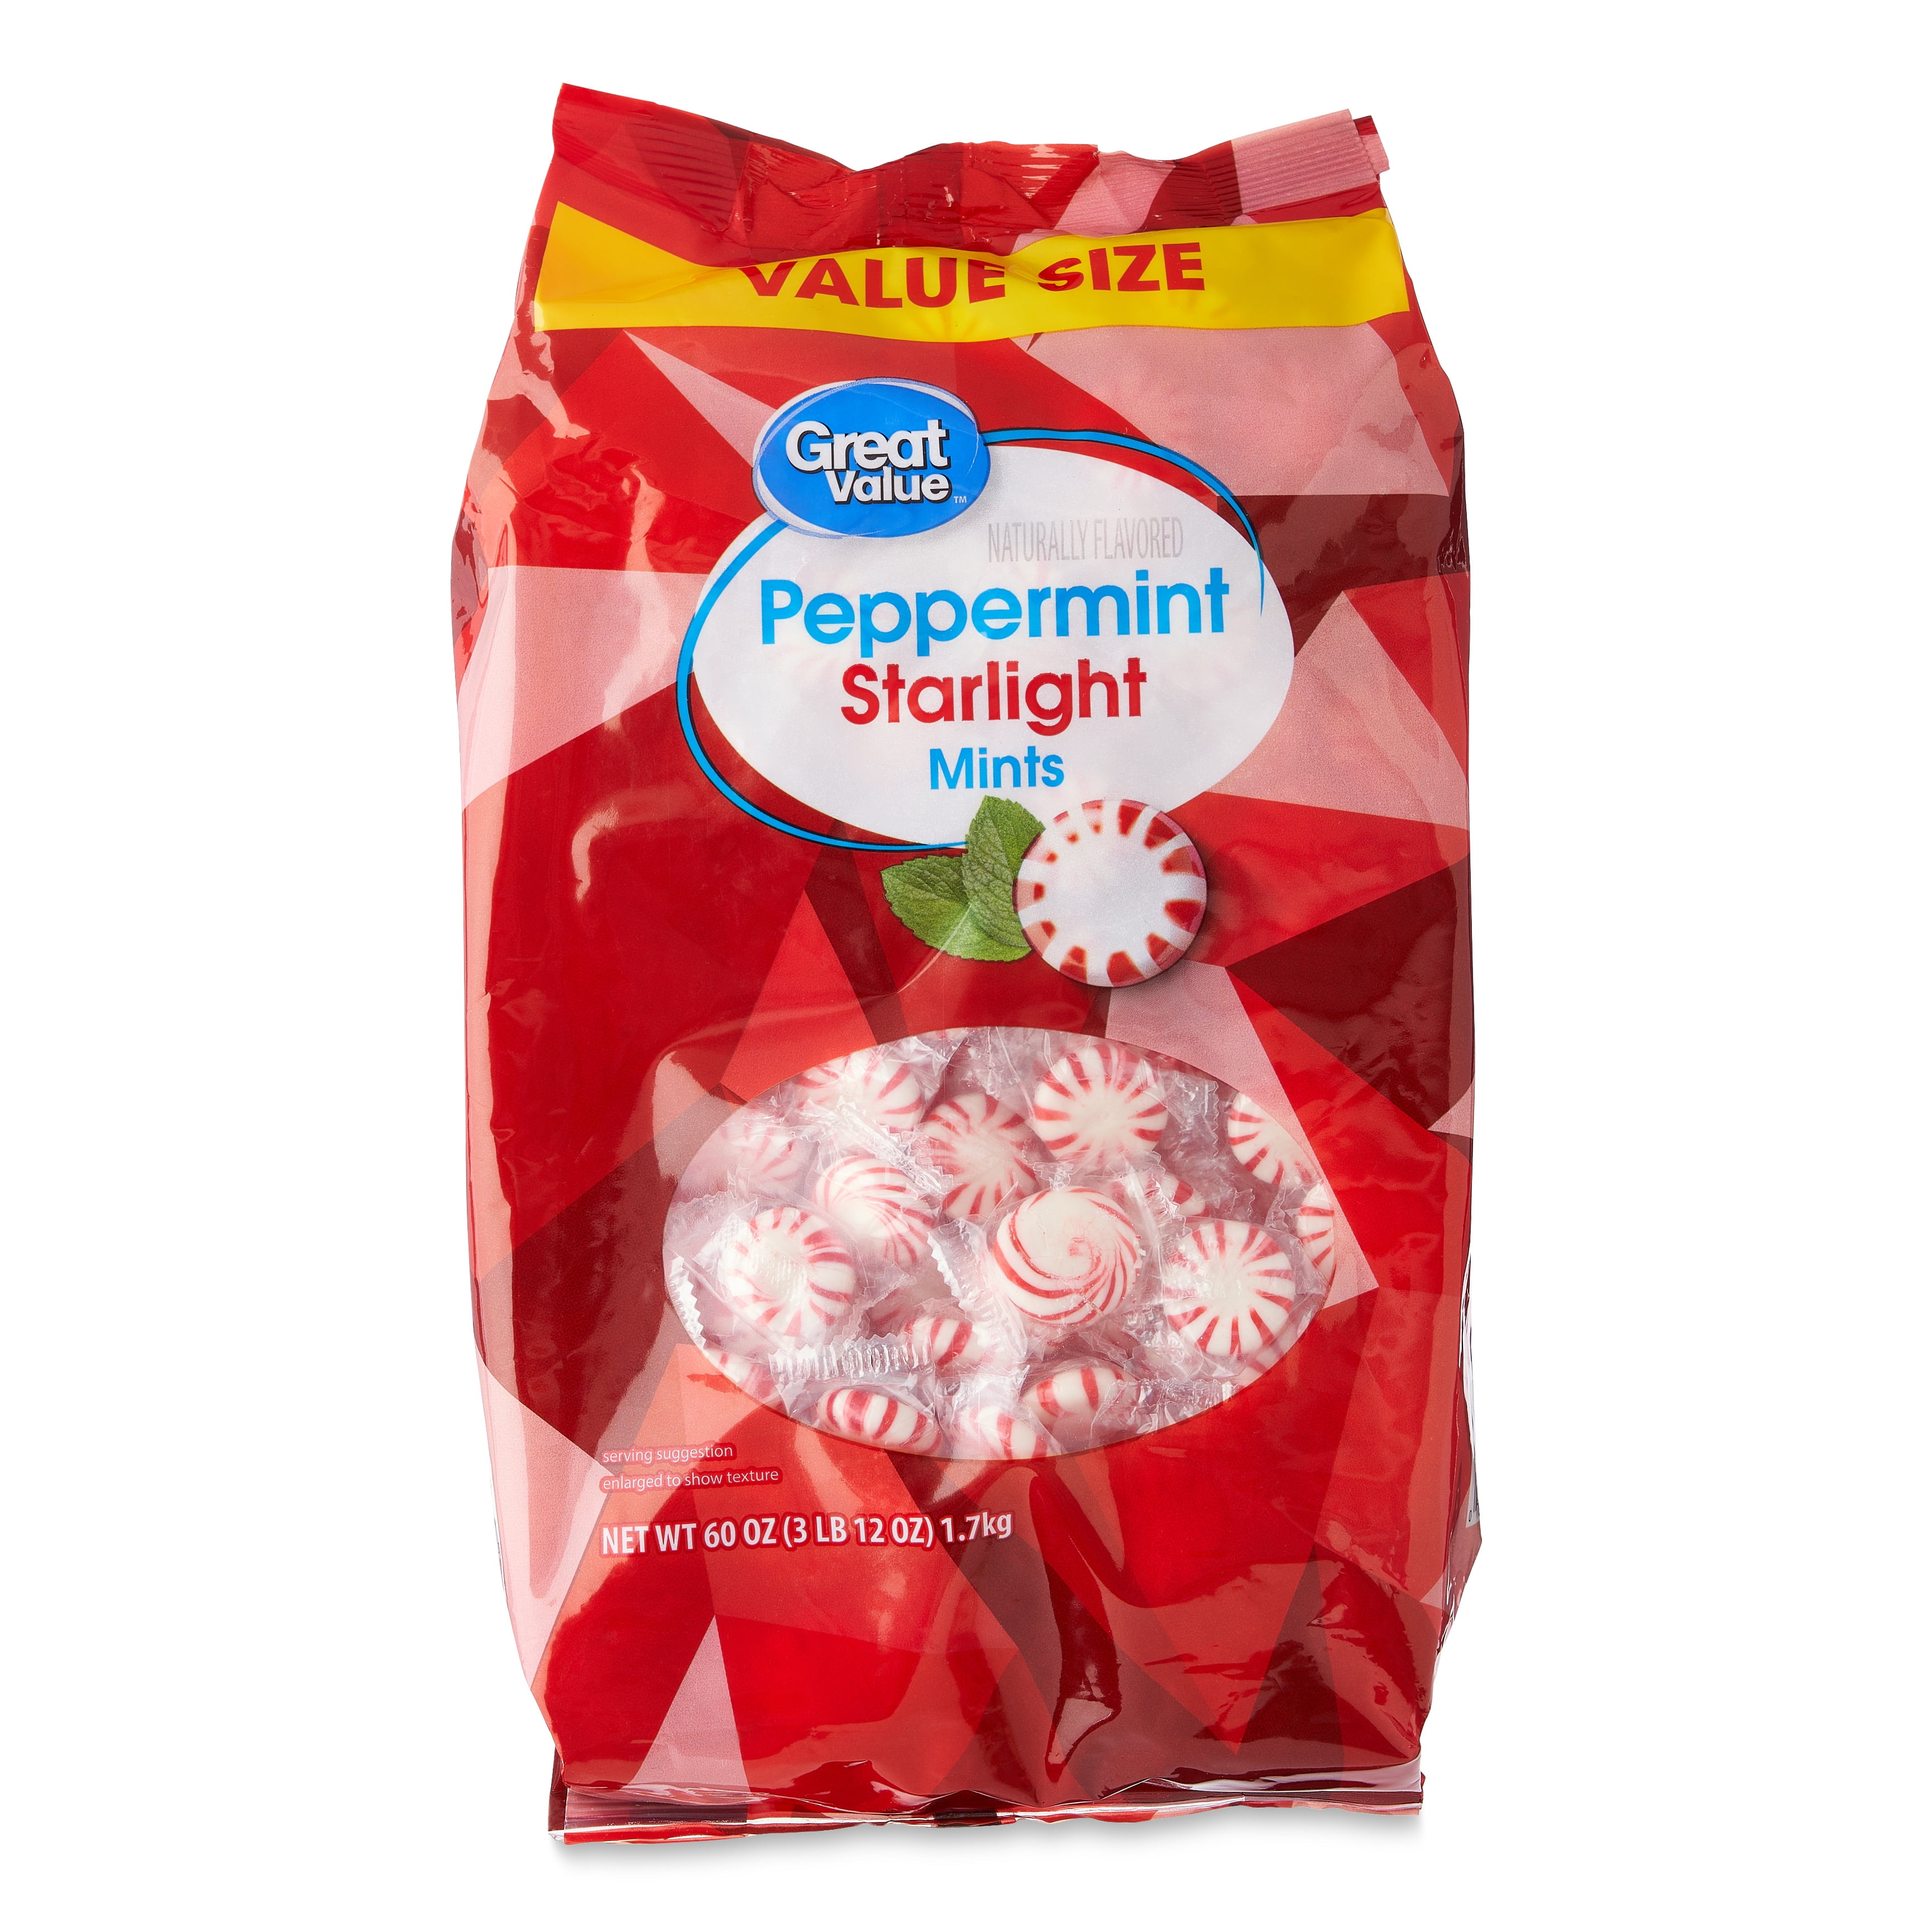 Great Value Peppermint Starlight Mints Hard Candy, 60 oz